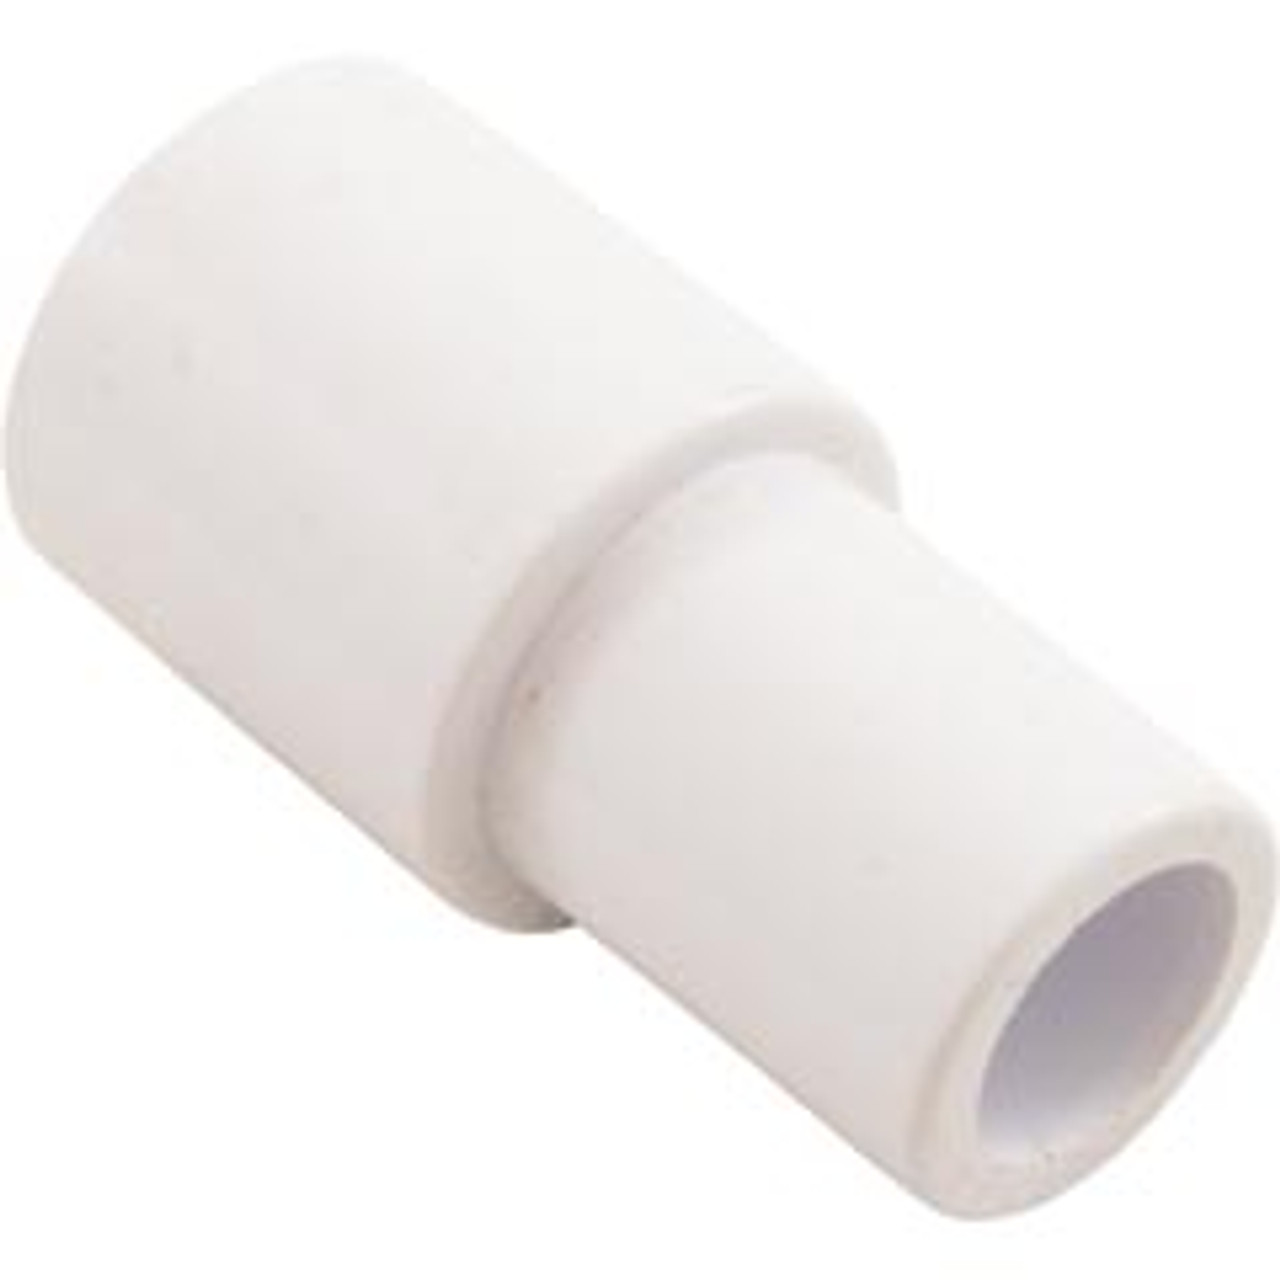 .75", 3/4. PVC, Pipe, Extender, Fitting, schedule, sch, 40, SP0301-07,  21181-750-000, 0301-07 , 200827 , 418-2000 , SPG-56-0074, CMP, Custom Molded Products, swimming, Pool, Plumbing, 895086001016